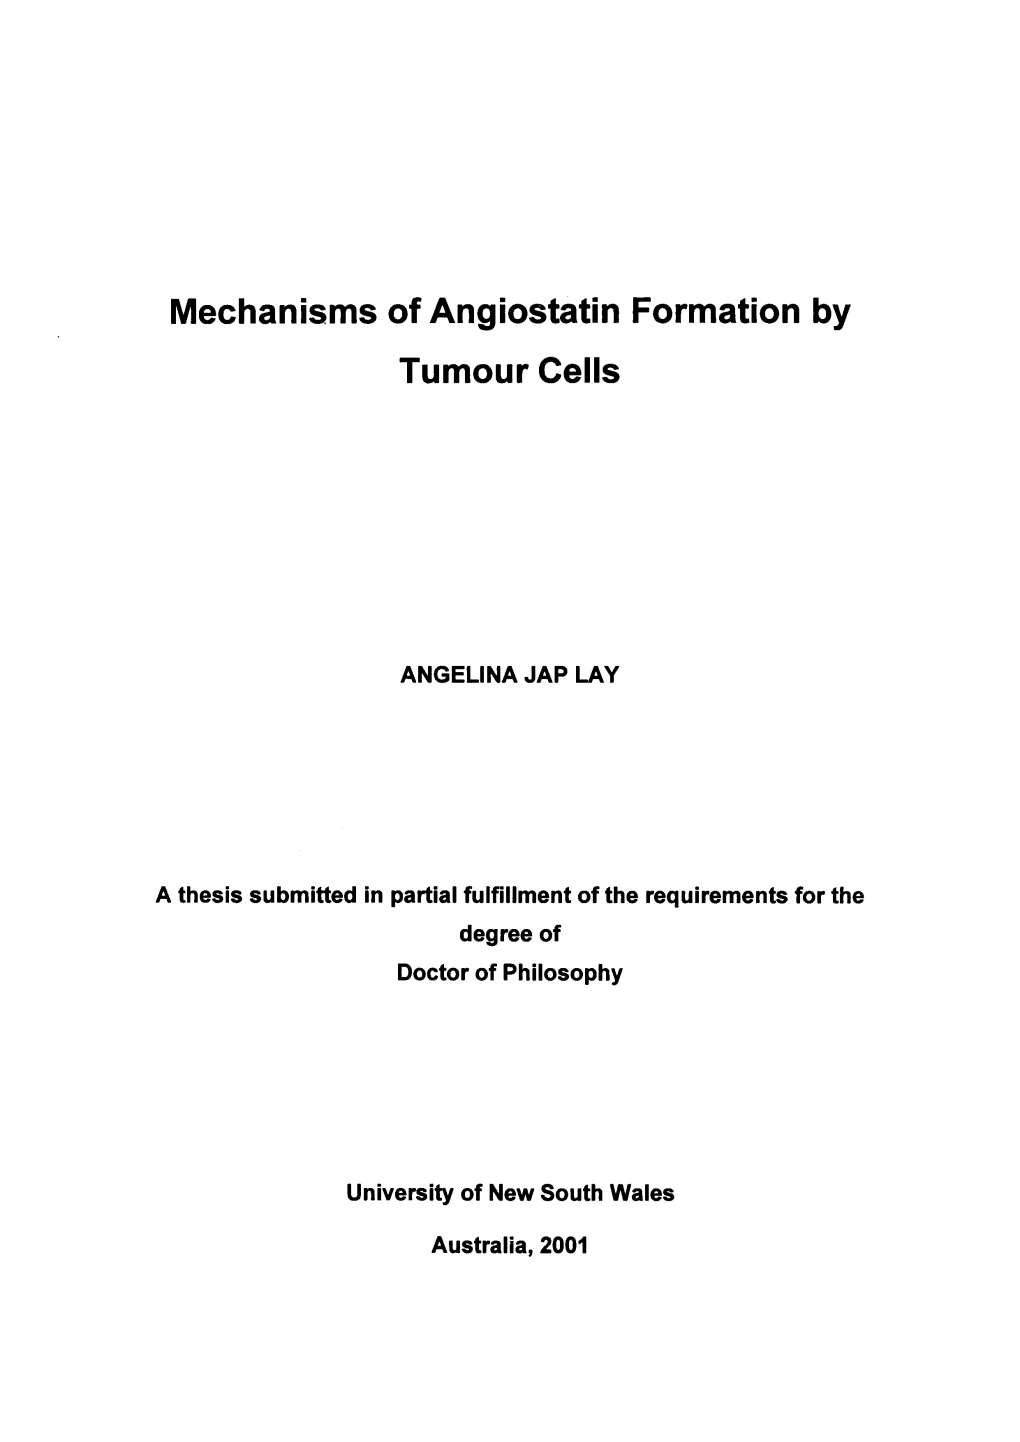 Mechanisms of Angiostatin Formation by Tumour Cells